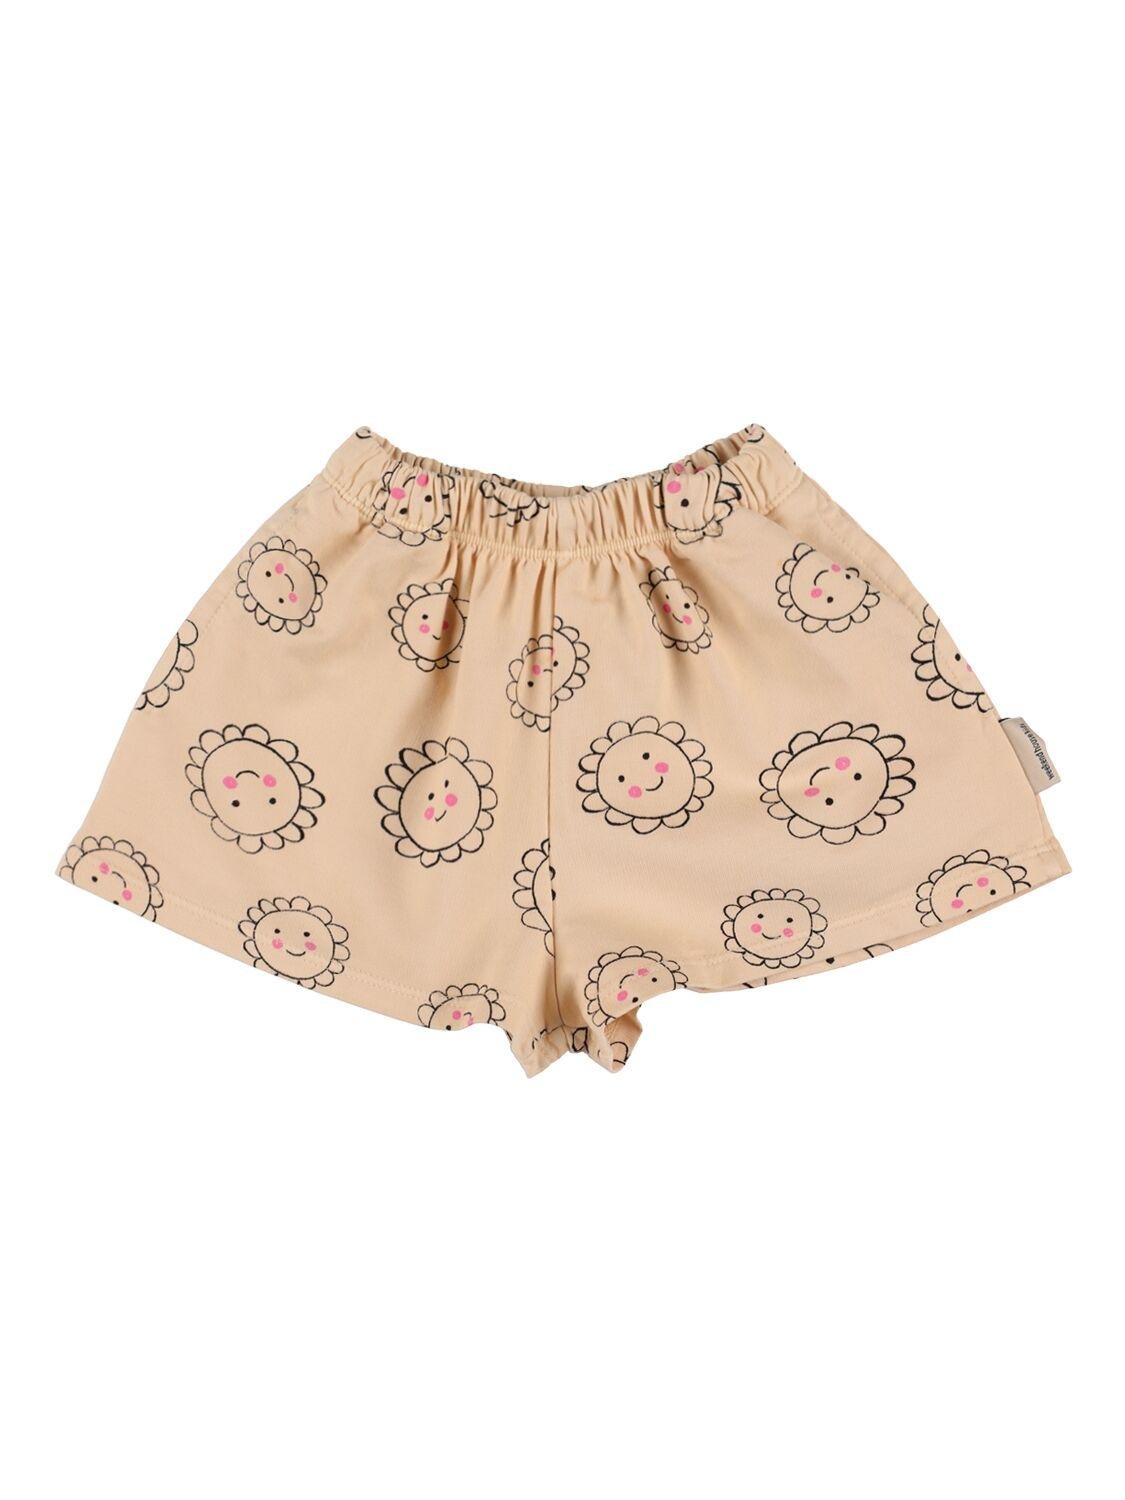 Printed Cotton Blend Shorts by WEEKEND HOUSE KIDS